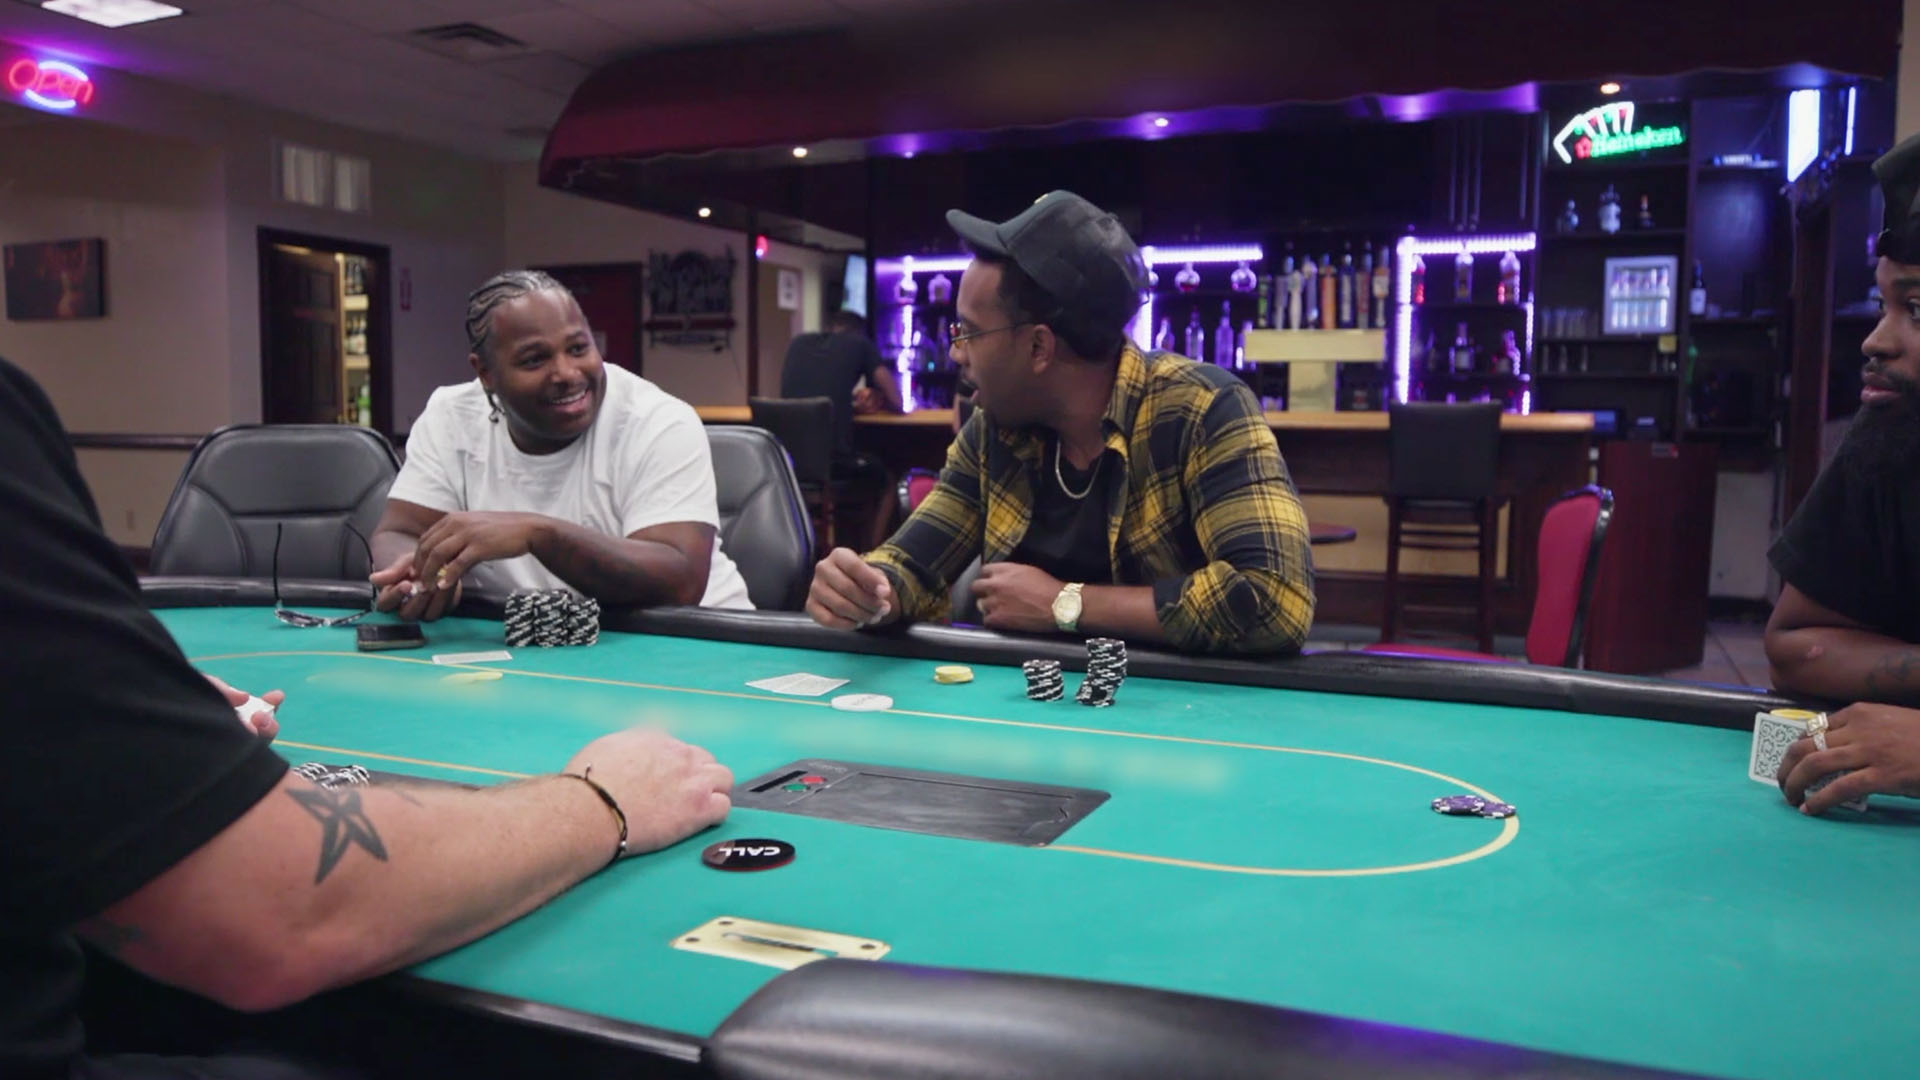 Watch Eric Explains His Gambling Hobby | Growing Up Hip Hop Video Extras